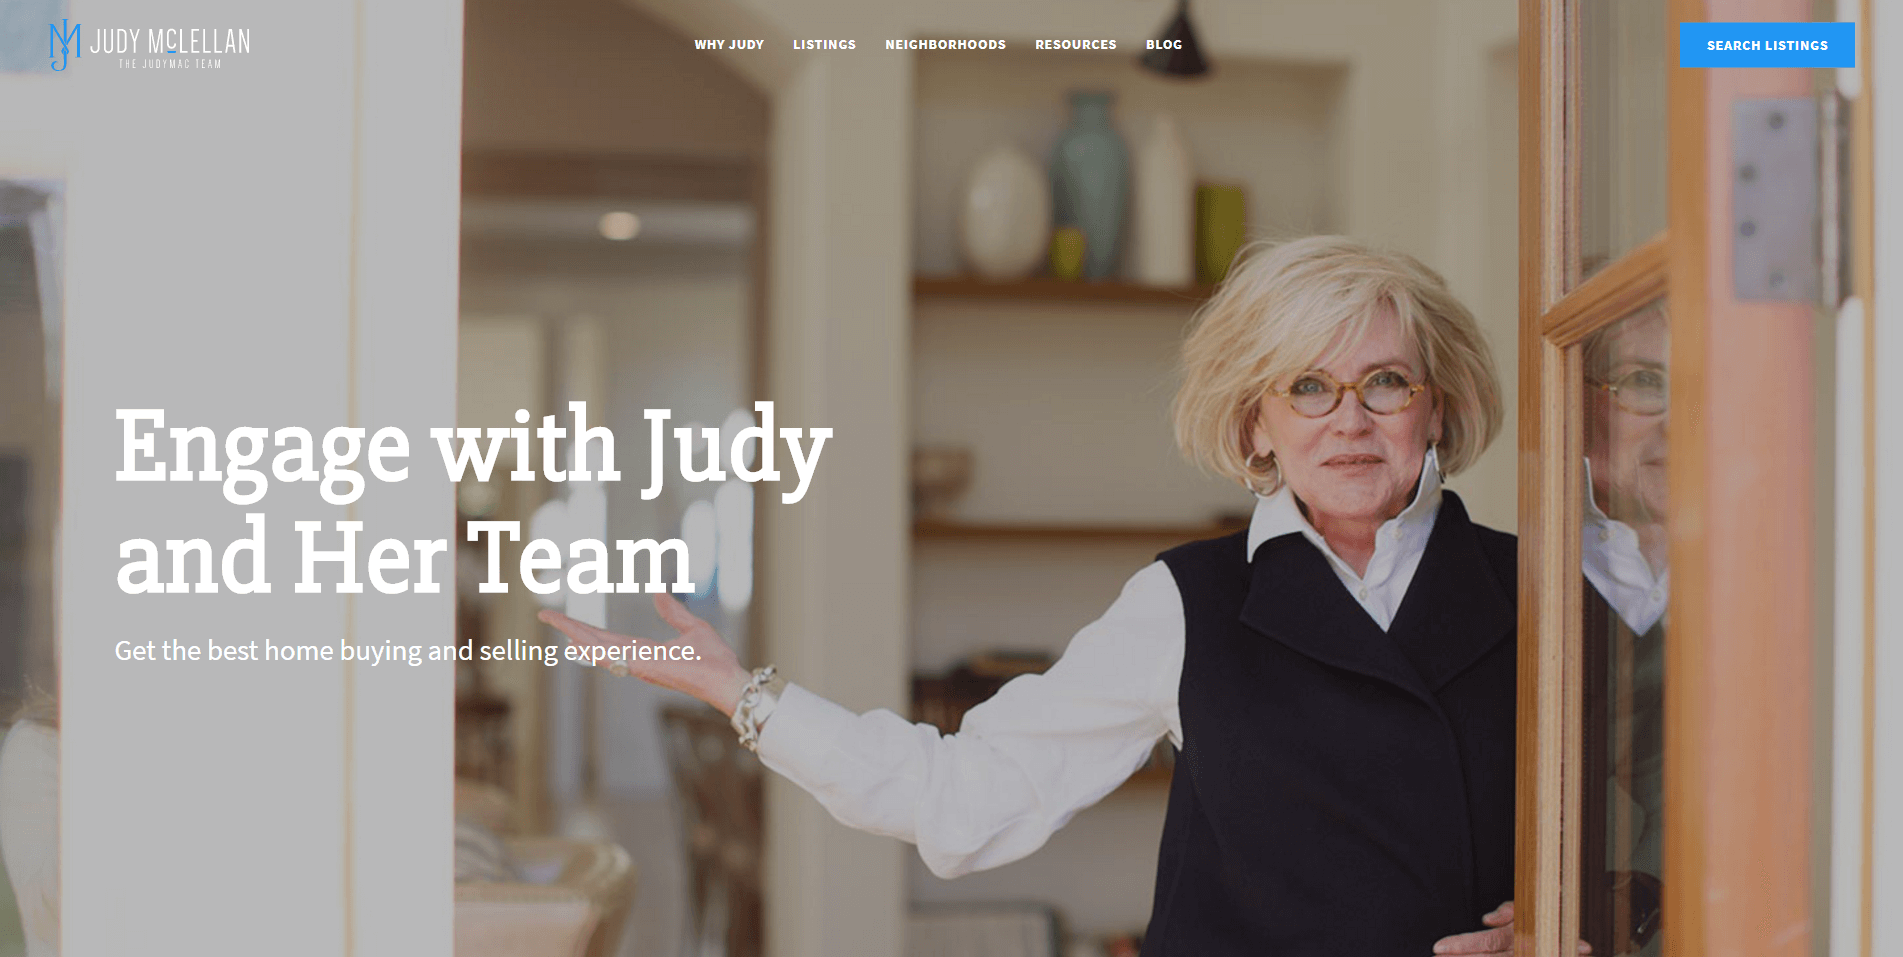  Check this out!  We reviewed each site and ranked them 1-101.  Here's judymac.com.  Want to see who made the cut? 